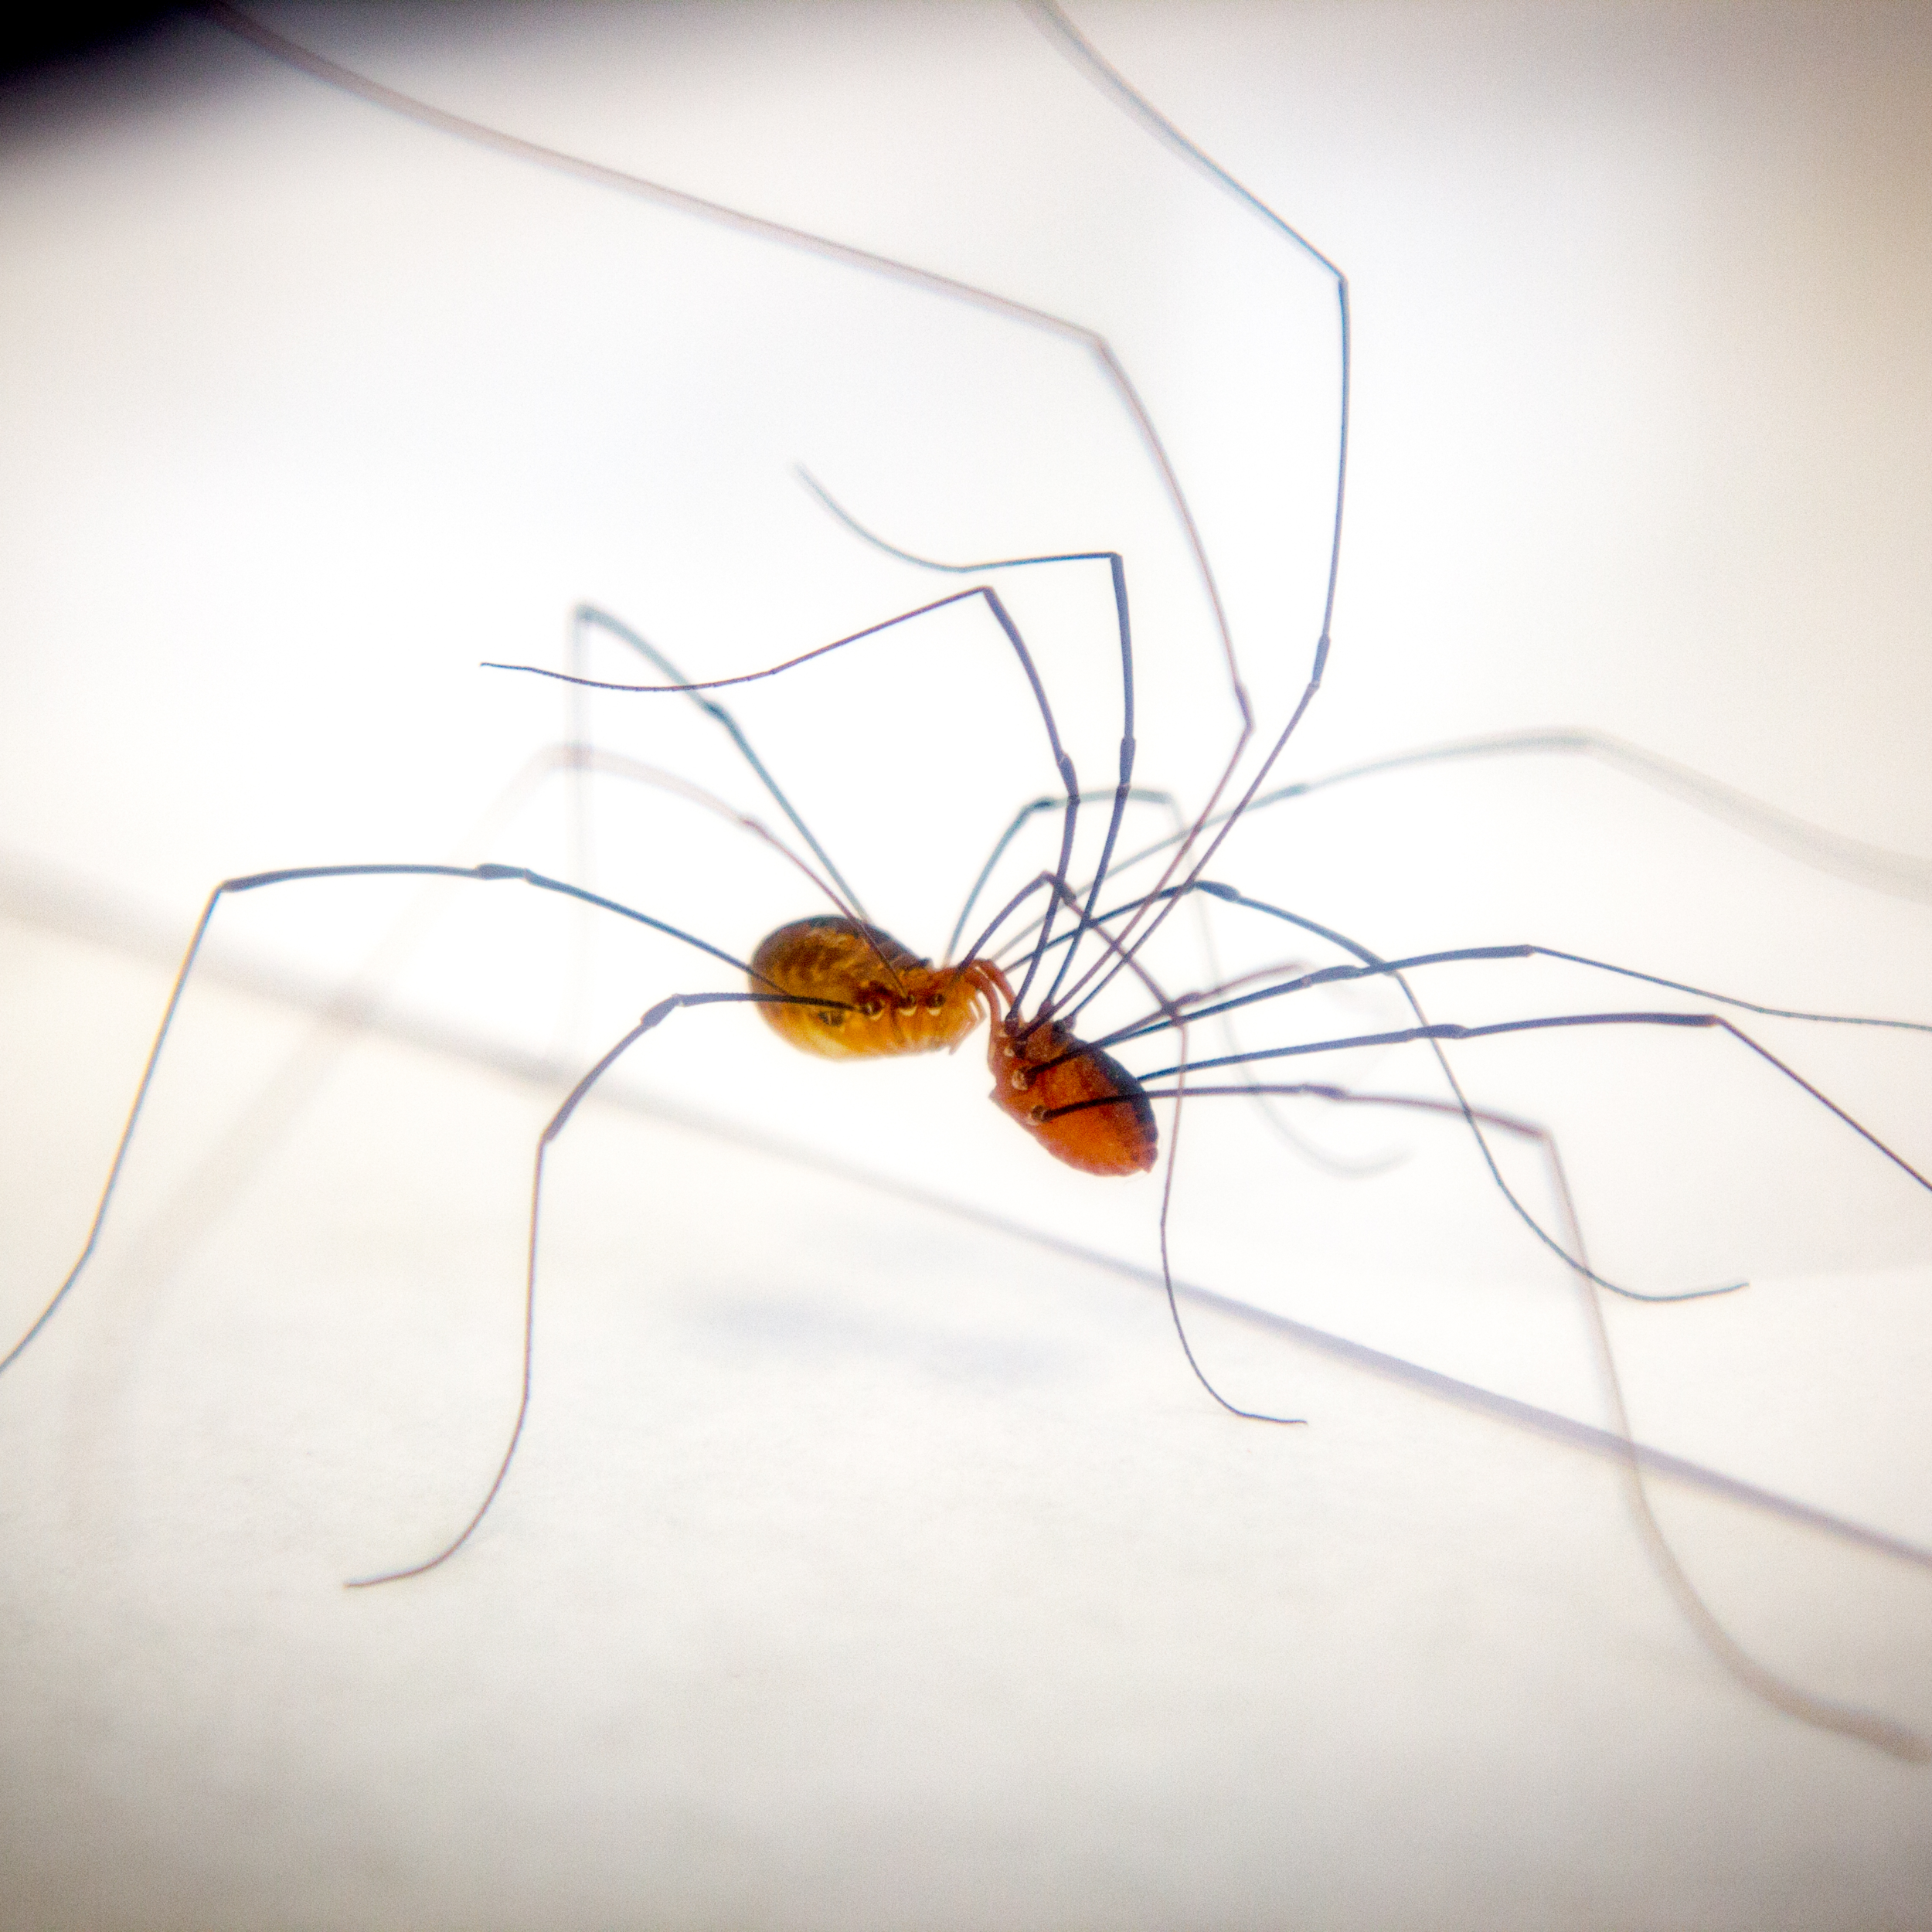 Daddy Longlegs Risk Lifeand Especially Limbto Survive